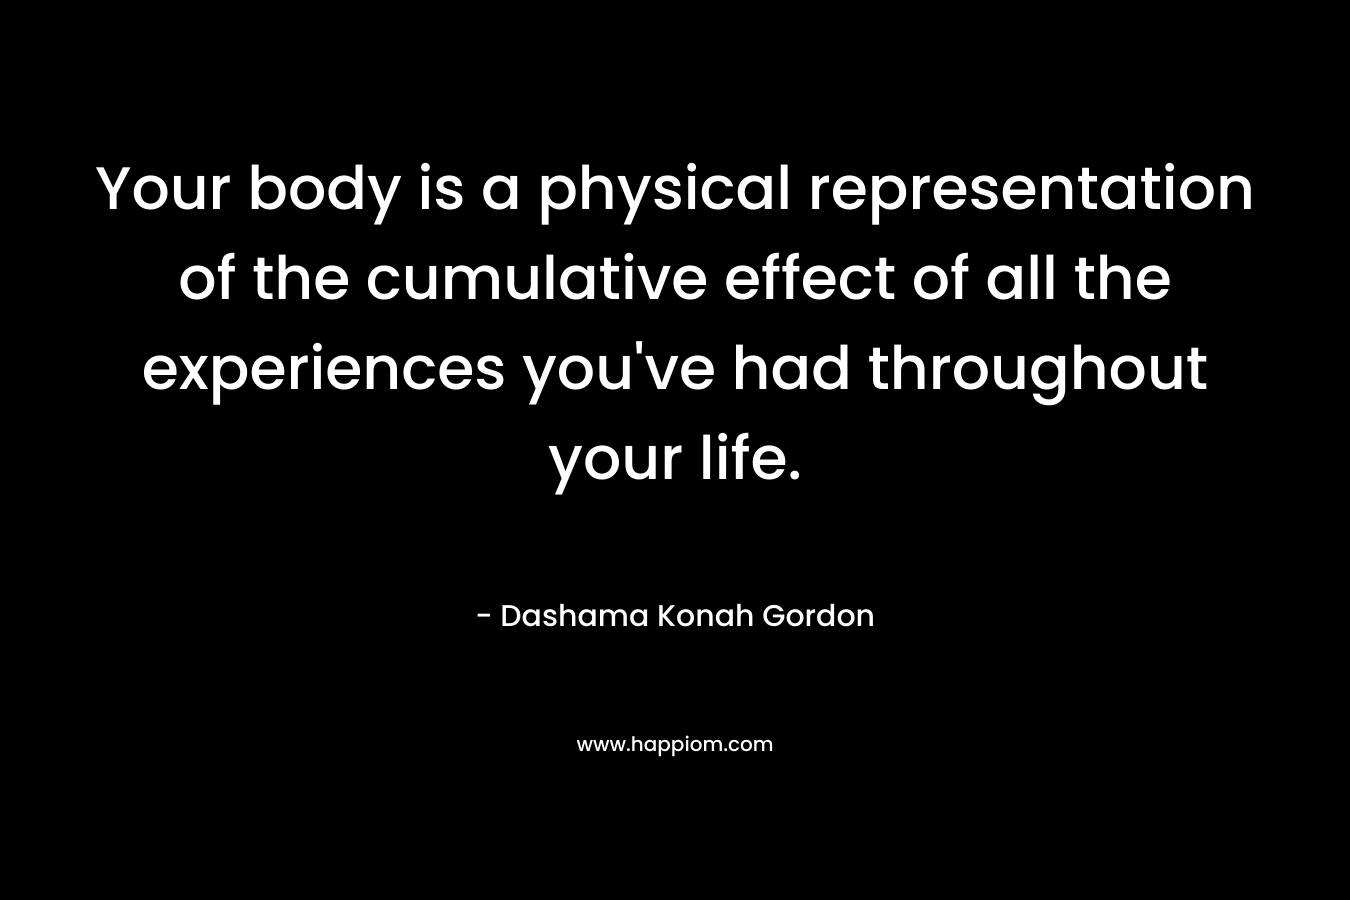 Your body is a physical representation of the cumulative effect of all the experiences you’ve had throughout your life. – Dashama Konah Gordon